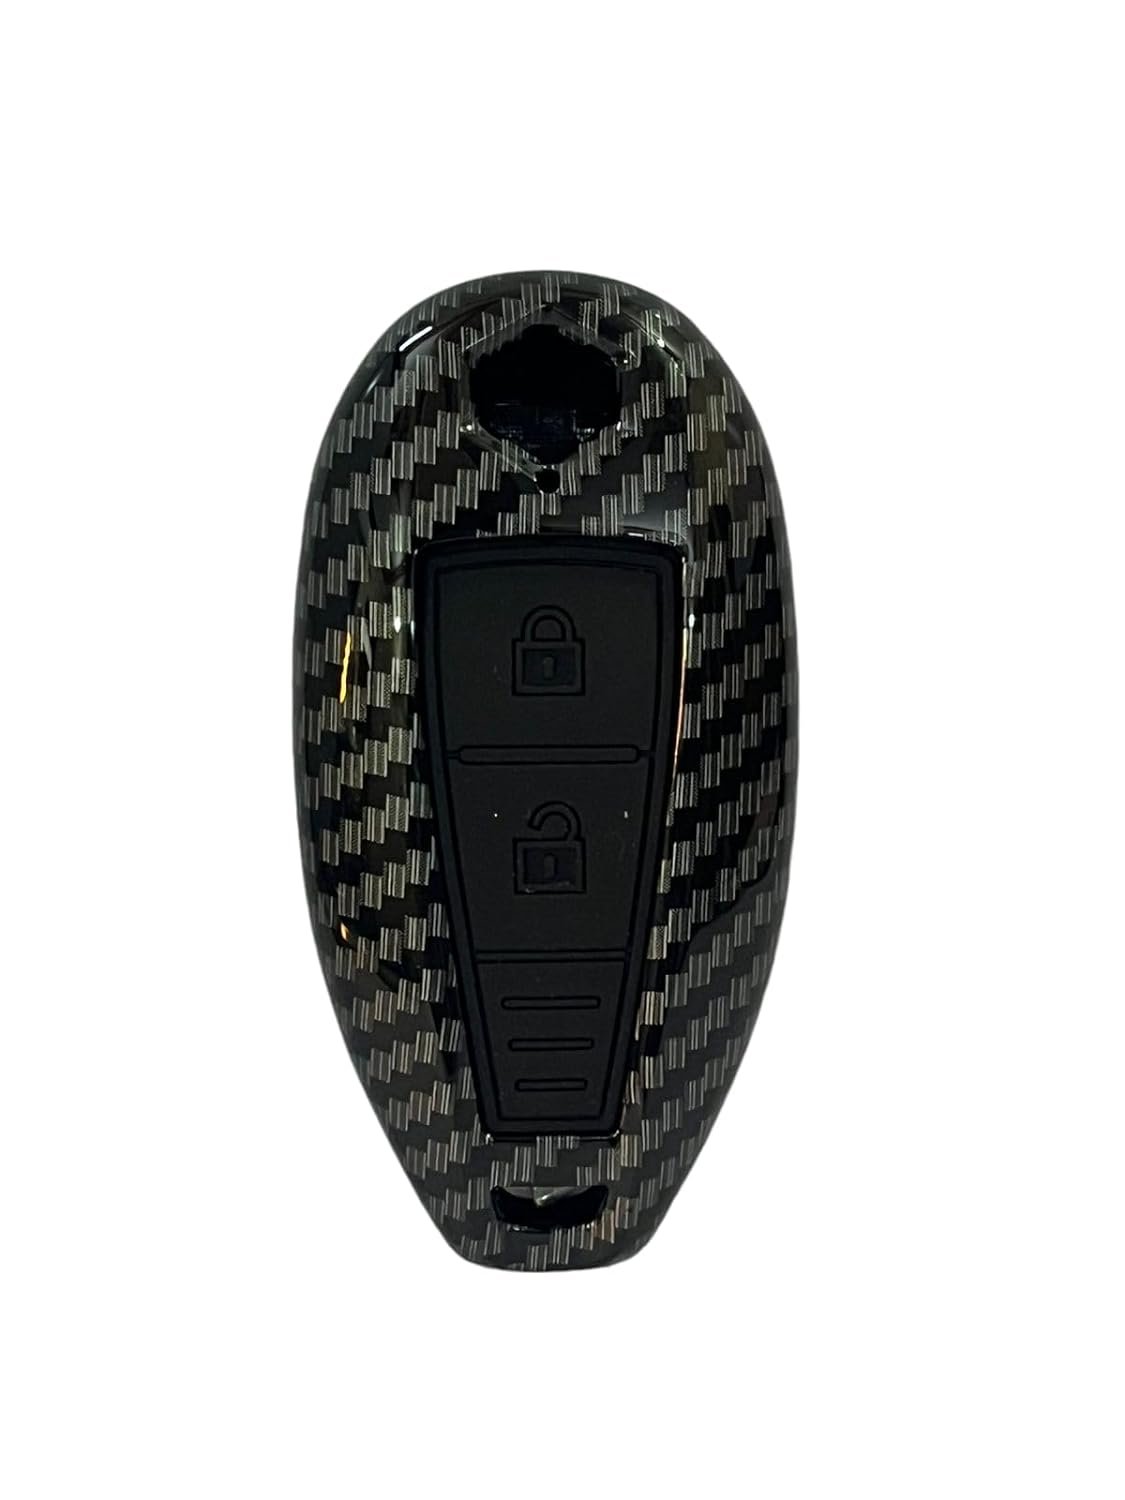 Carbon Fiber ABS Car Key Cover Compatible with Baleno, Breeza, S Cross, Ciaz, Swift 2 Button Smart Key (Key Chain Included) Image 